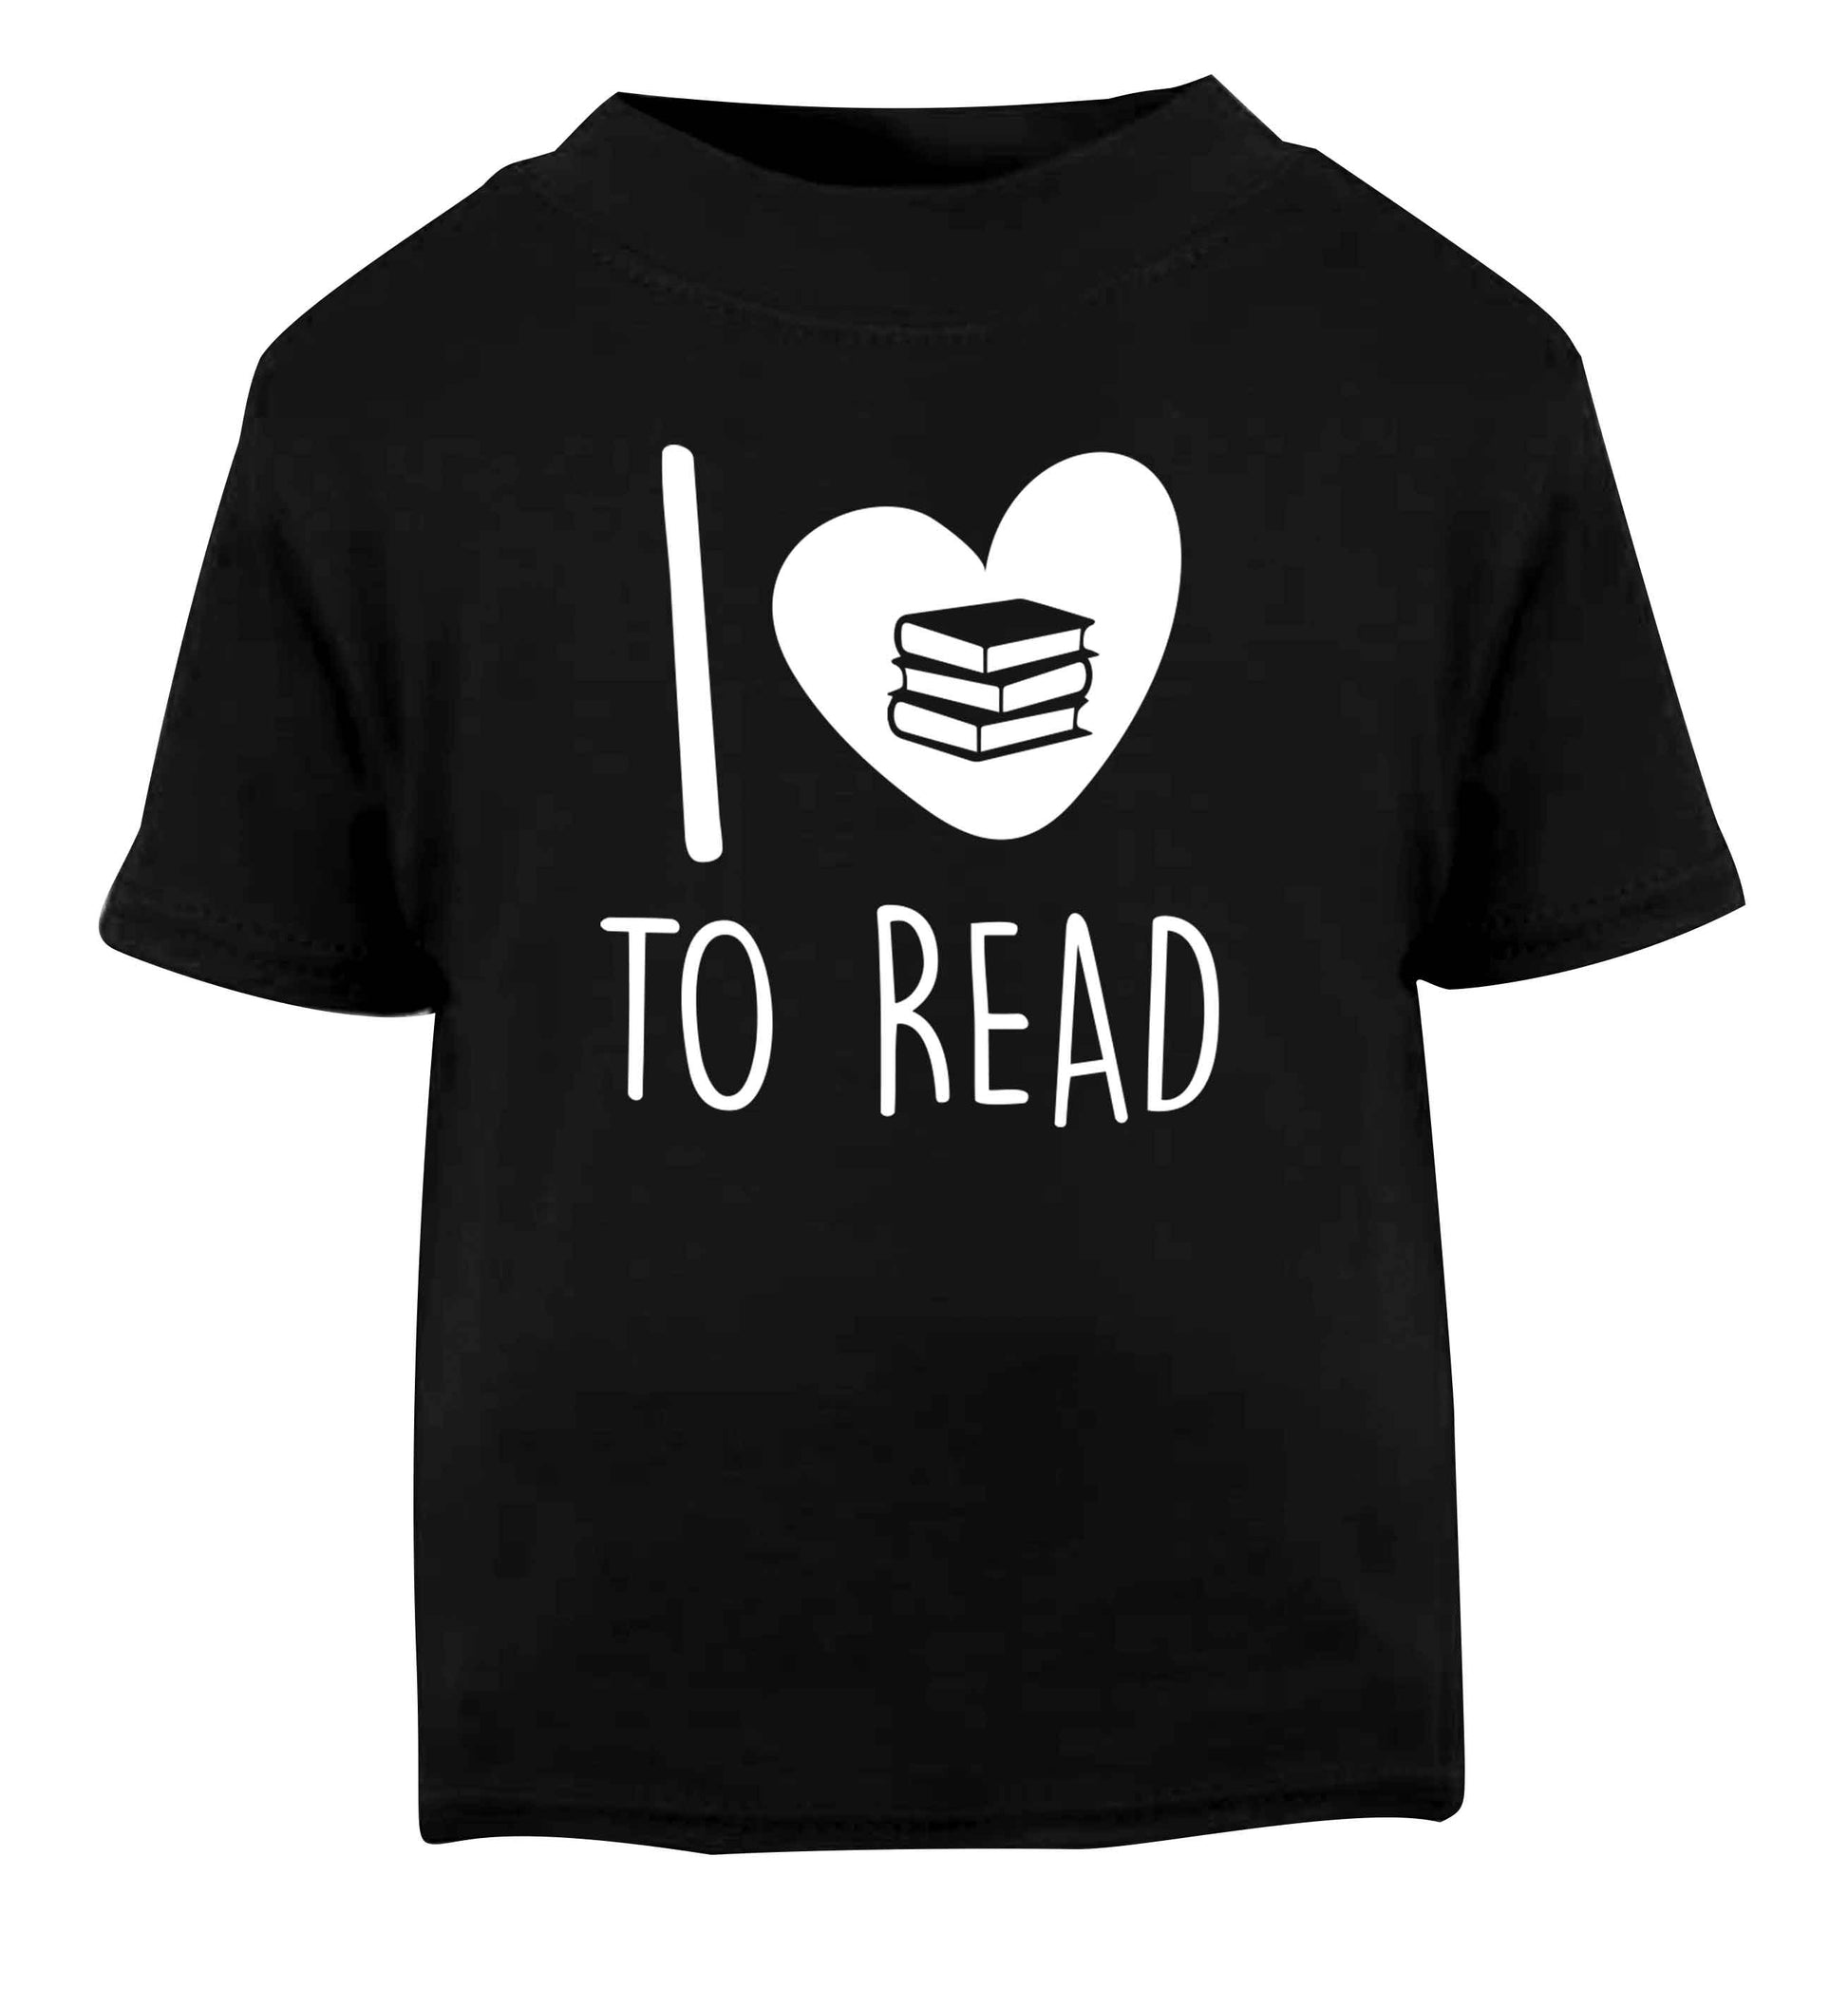 I love to read Black Baby Toddler Tshirt 2 years